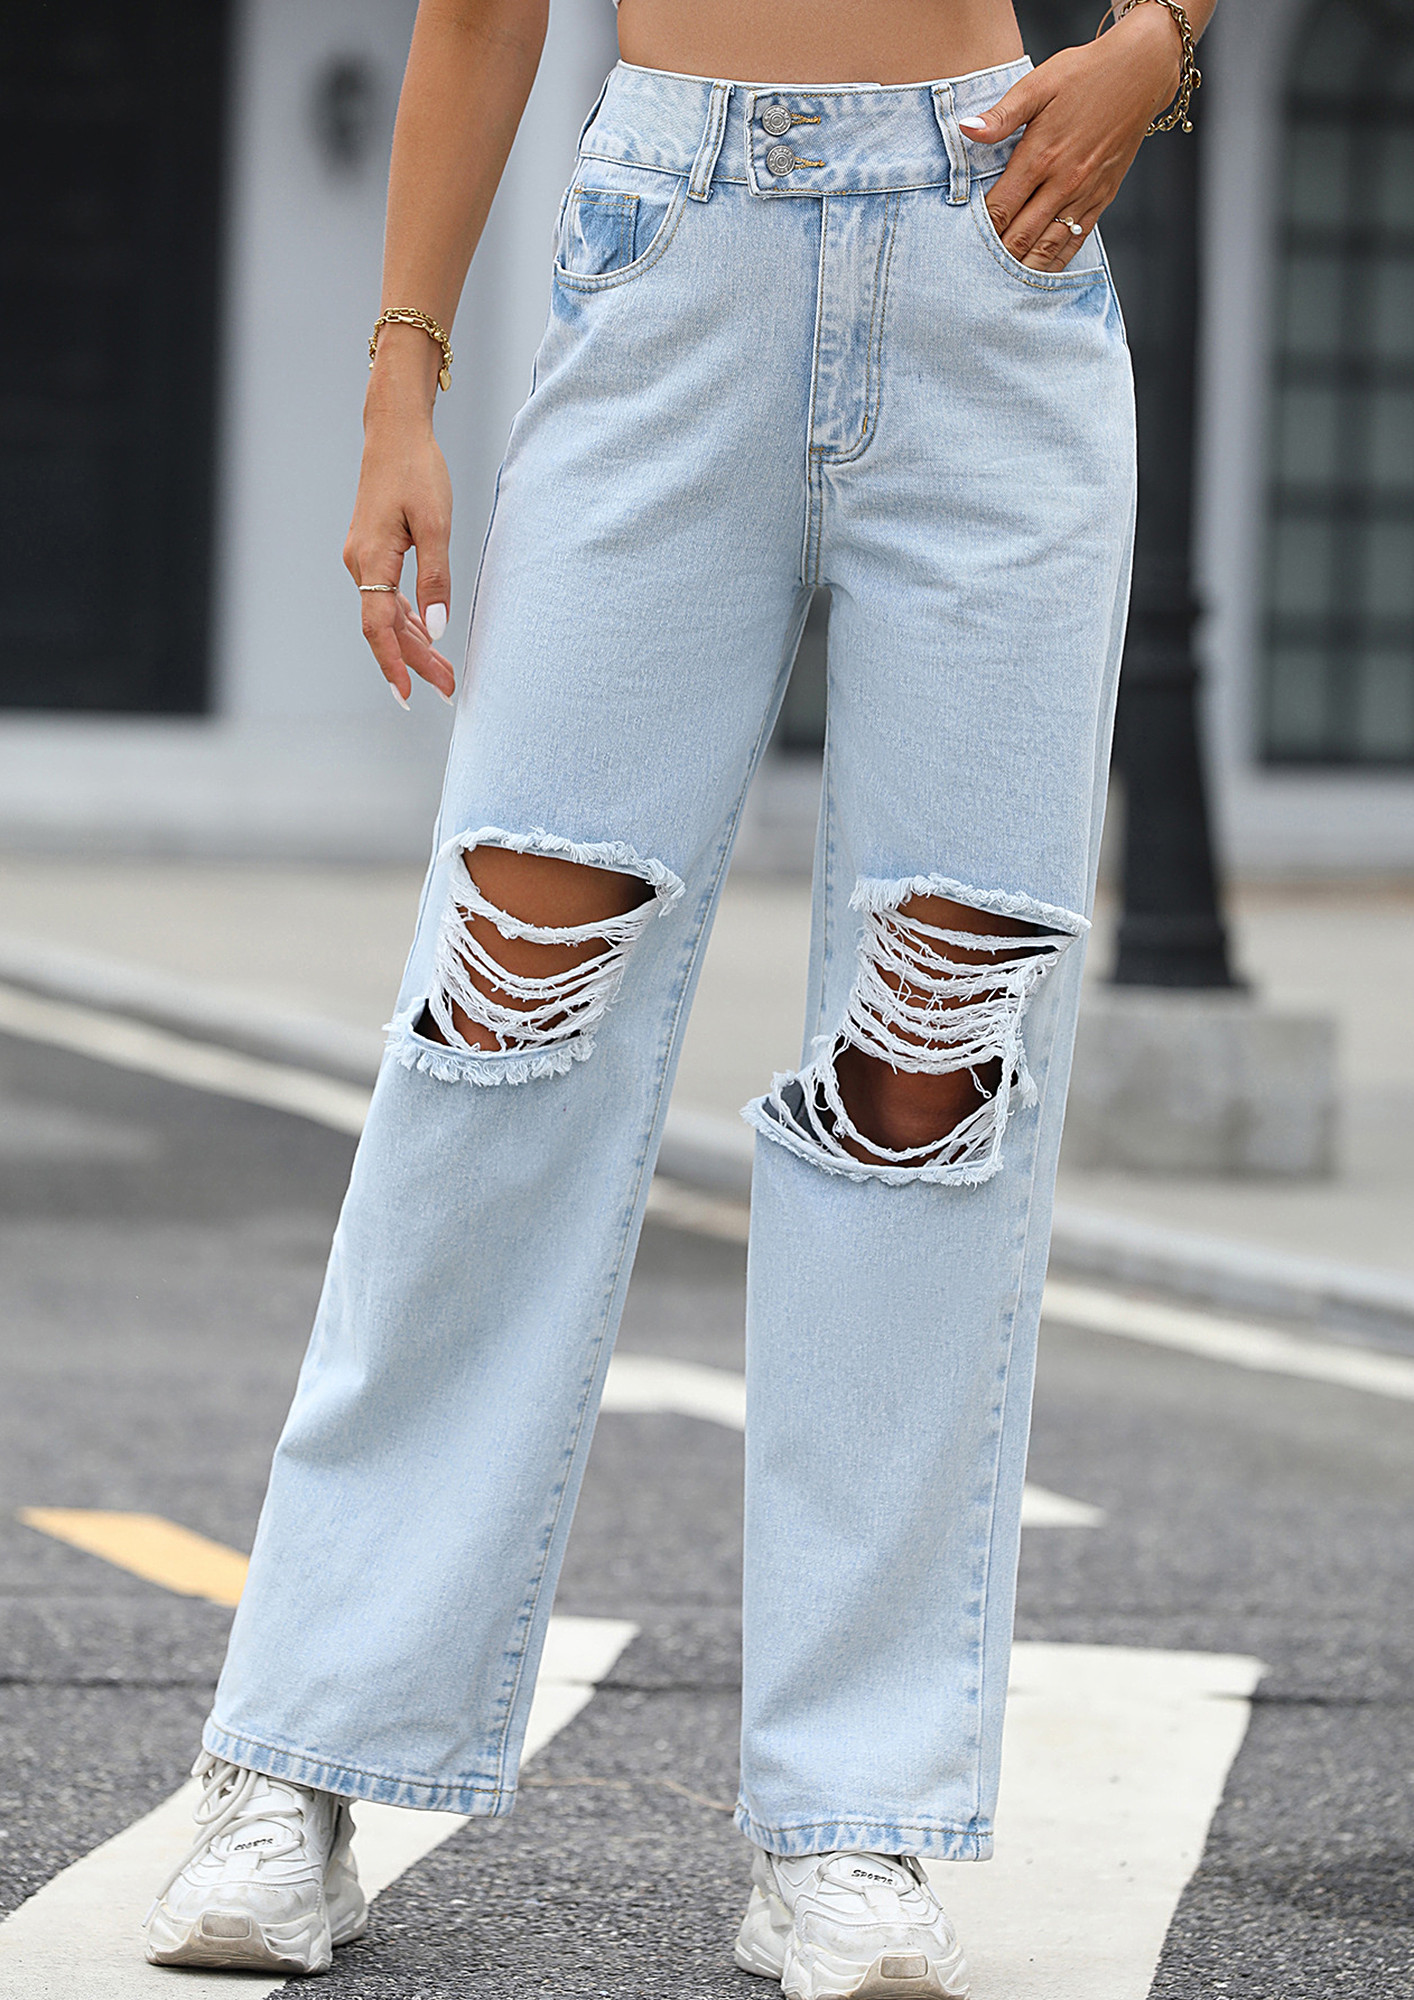 New Women Denim Skinny Ripped Pants High Waist Stretch Casual Jeans Slim  Pencil Trousers, Women Jeans, Girls Jeans, लड़कियों की जीन्स - My Online  Collection Store, Bengaluru | ID: 2851547620733